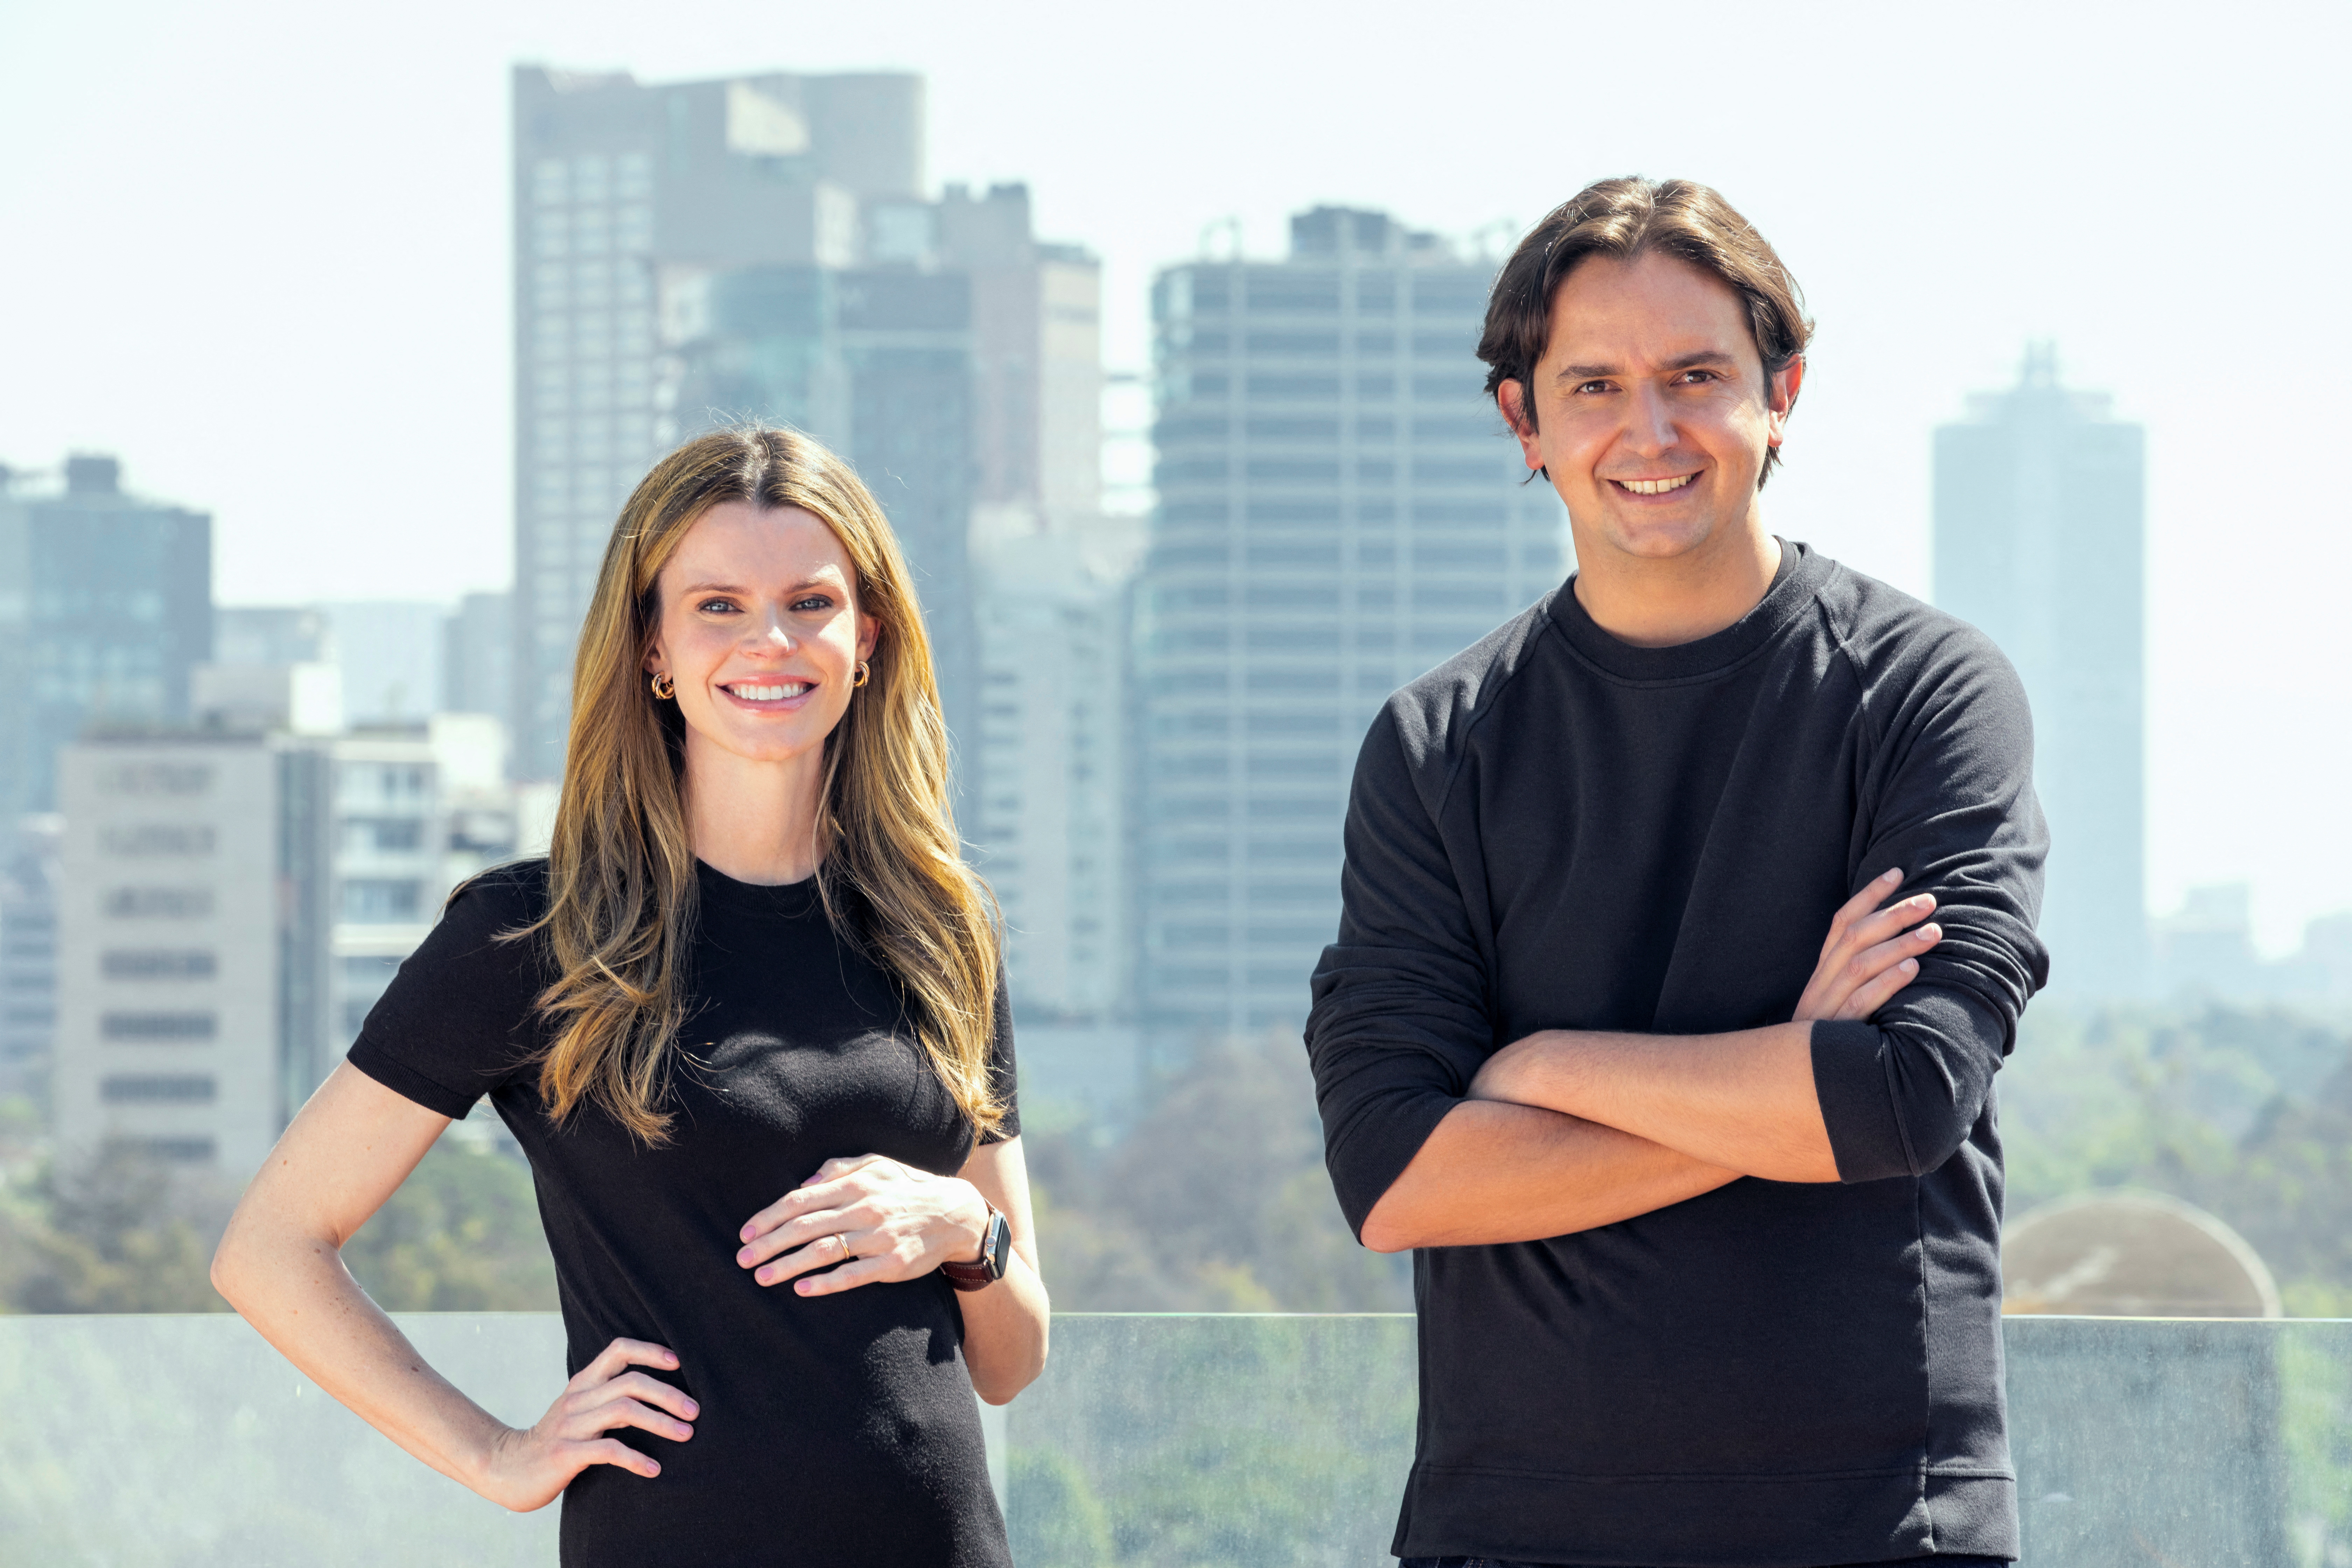 TuHabi co-founders Brynne McNulty Rojas and Sebastian Noguera pose for this handout photo in Mexico City